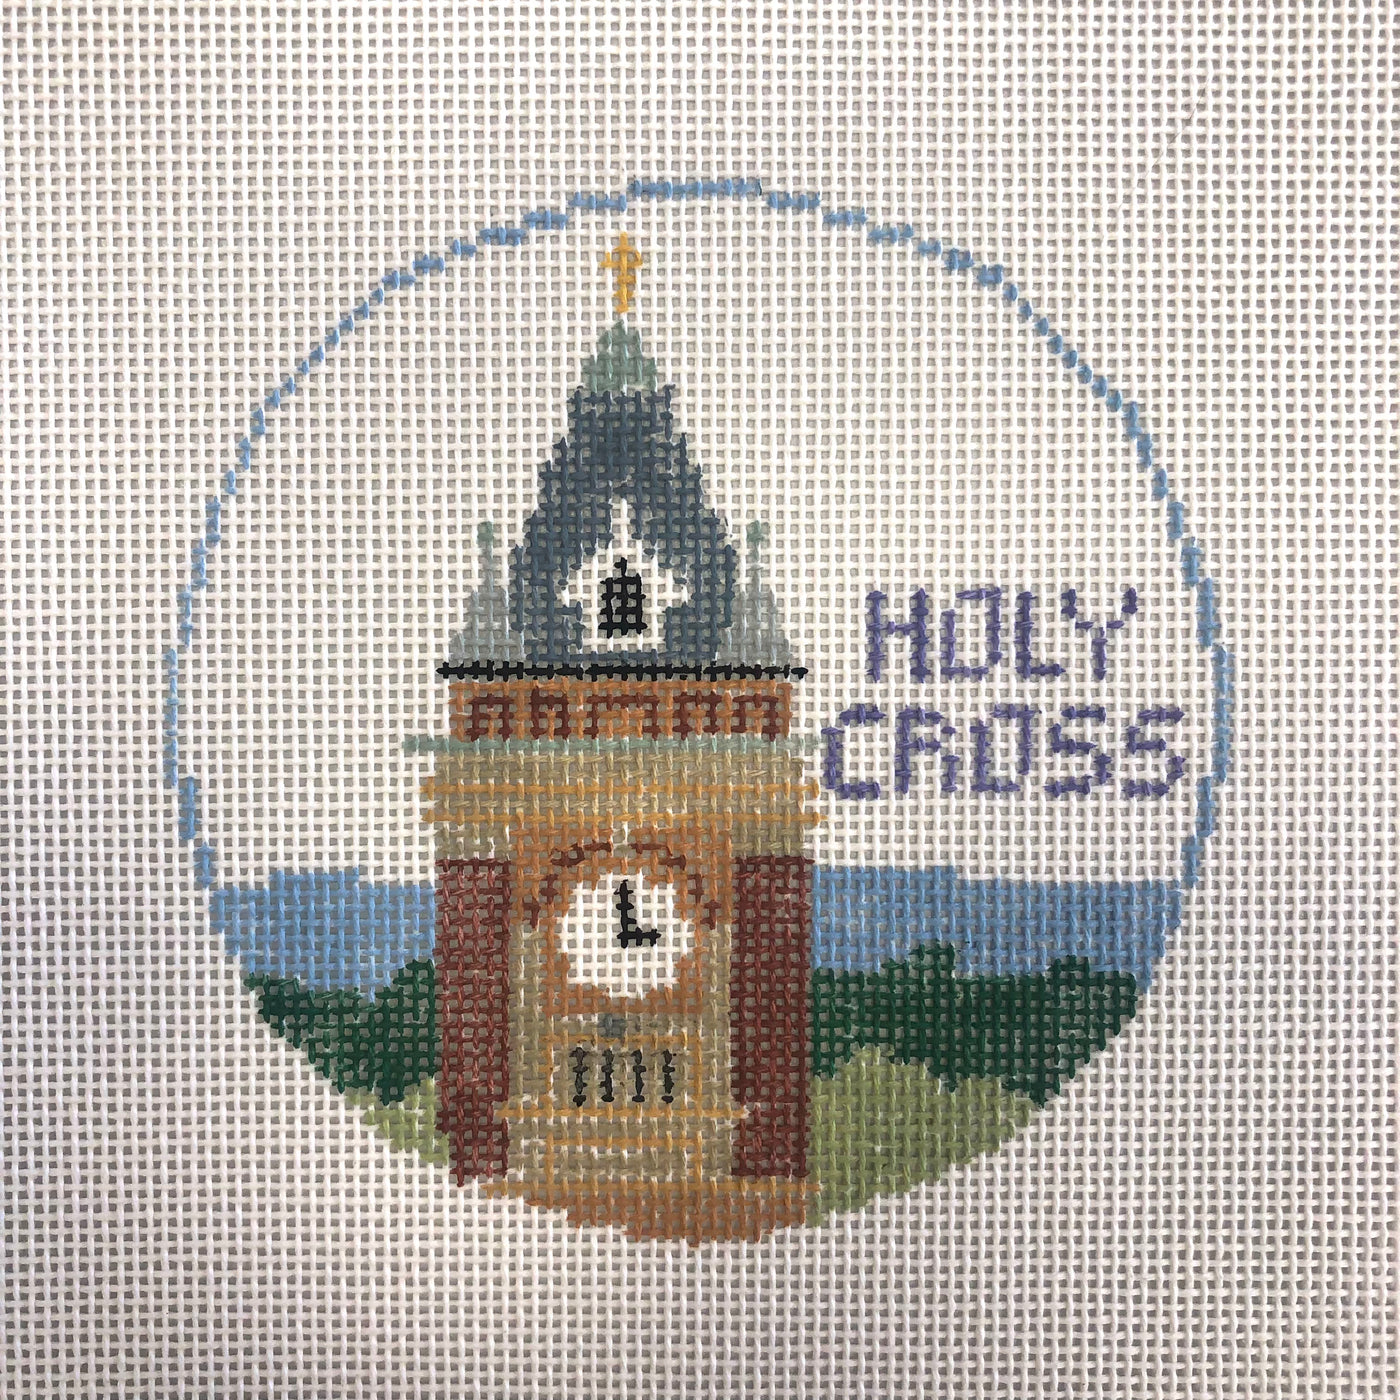 Holy Cross Round Ornament Needlepoint Canvas